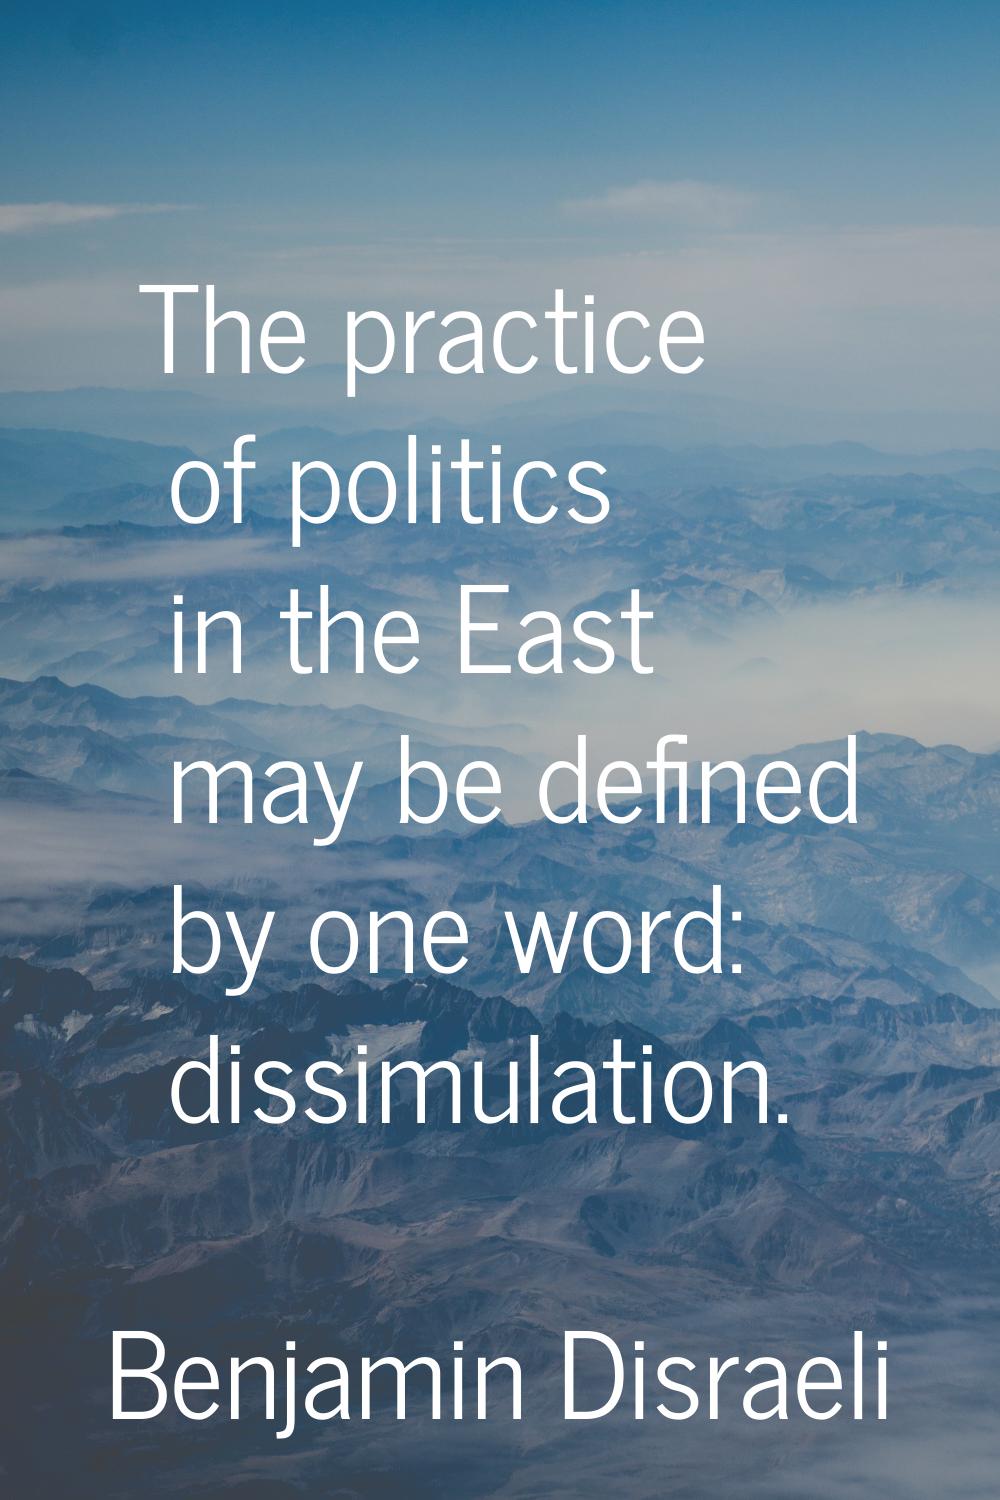 The practice of politics in the East may be defined by one word: dissimulation.